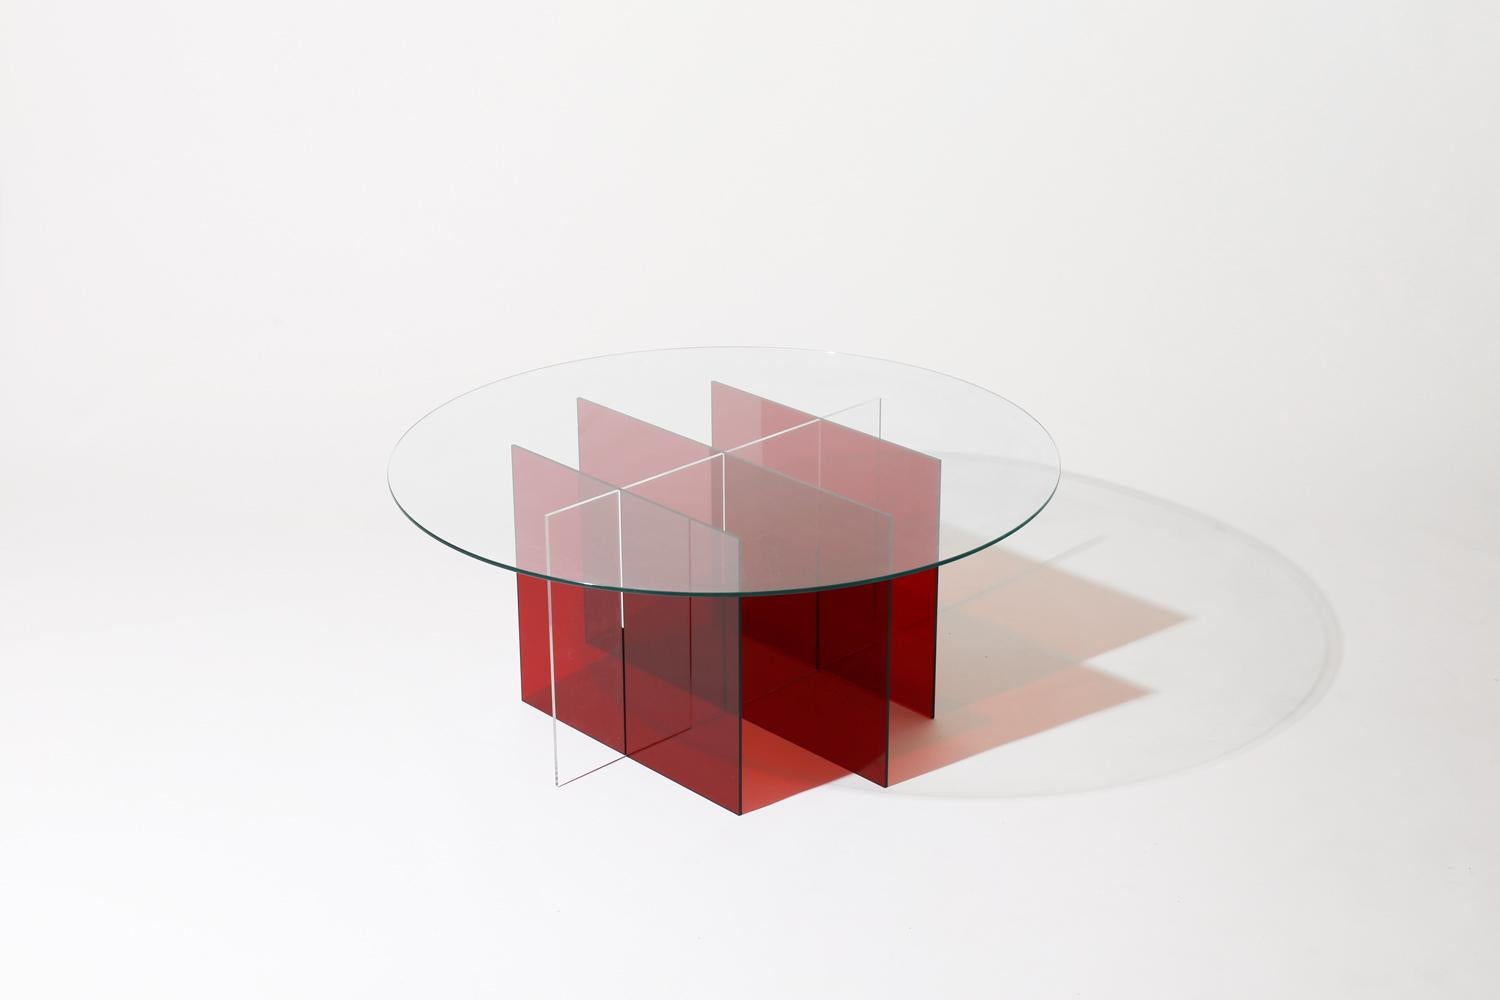 Made to order. Please allow up to 8 weeks for production.

The Sundial coffee table is an experiential furniture piece, with distinct profiles and playful interaction with light and shadow. The table appears paper thin from one angle and then the